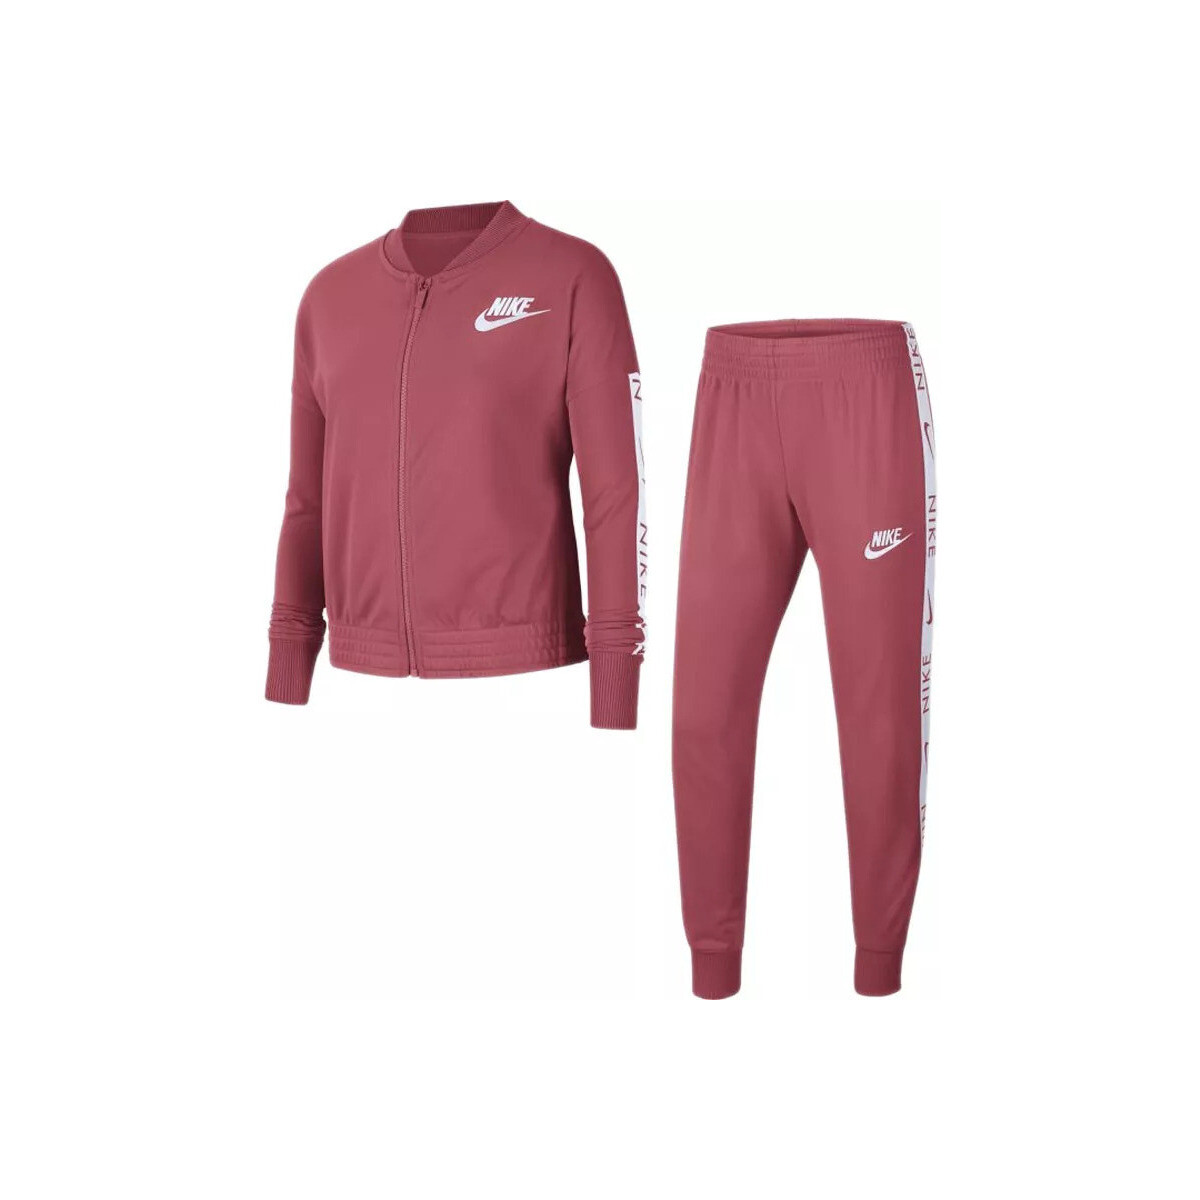 Nike Rose G NSW TRACK SUITS 1uOfgEqS